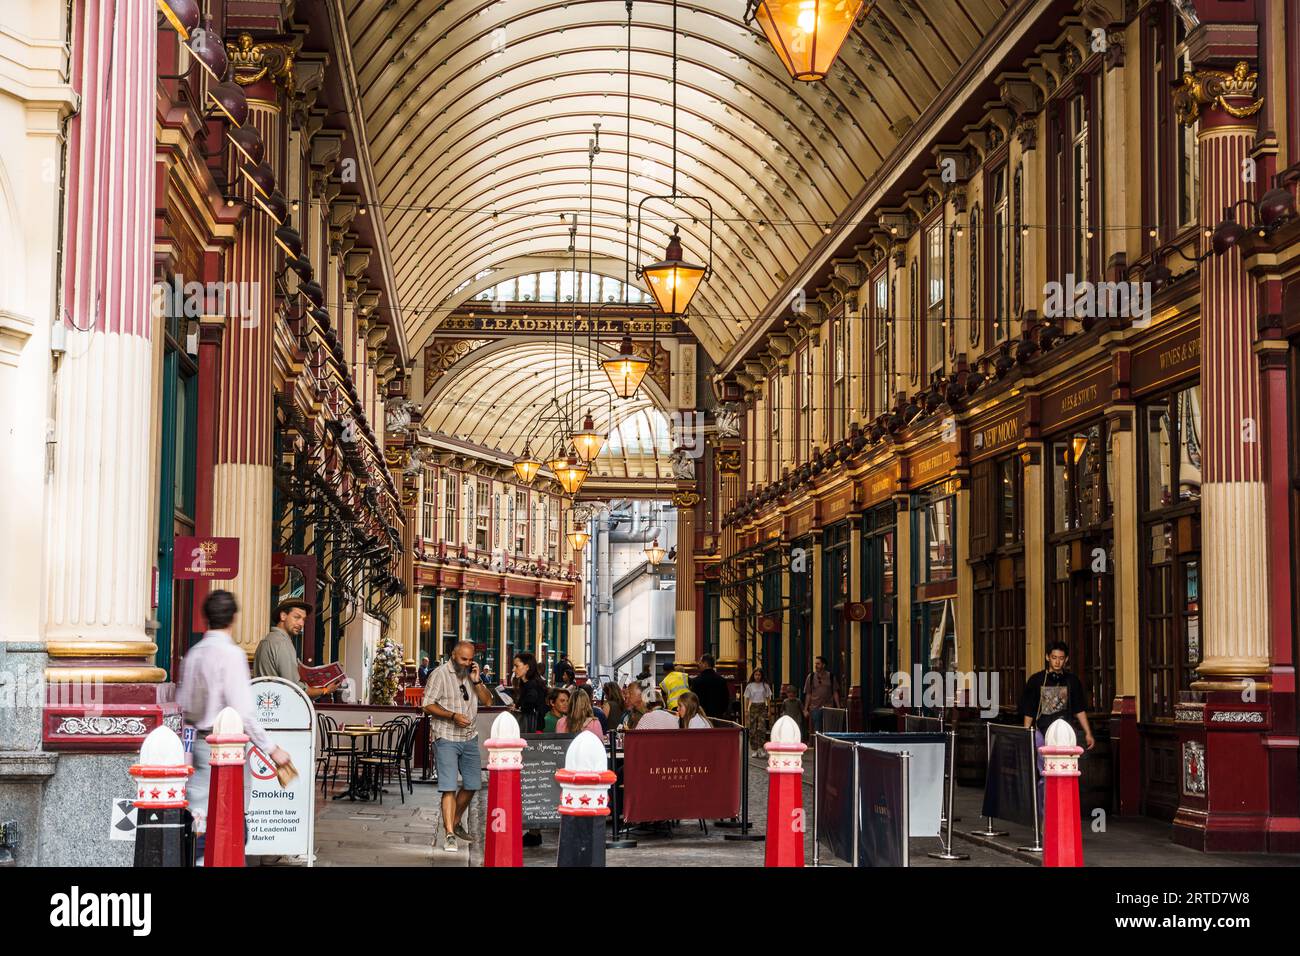 London, UK - August 25, 2023: Interior view of the famous Leadenhall Market in the City of London. It is one of the oldest markets in London Stock Photo